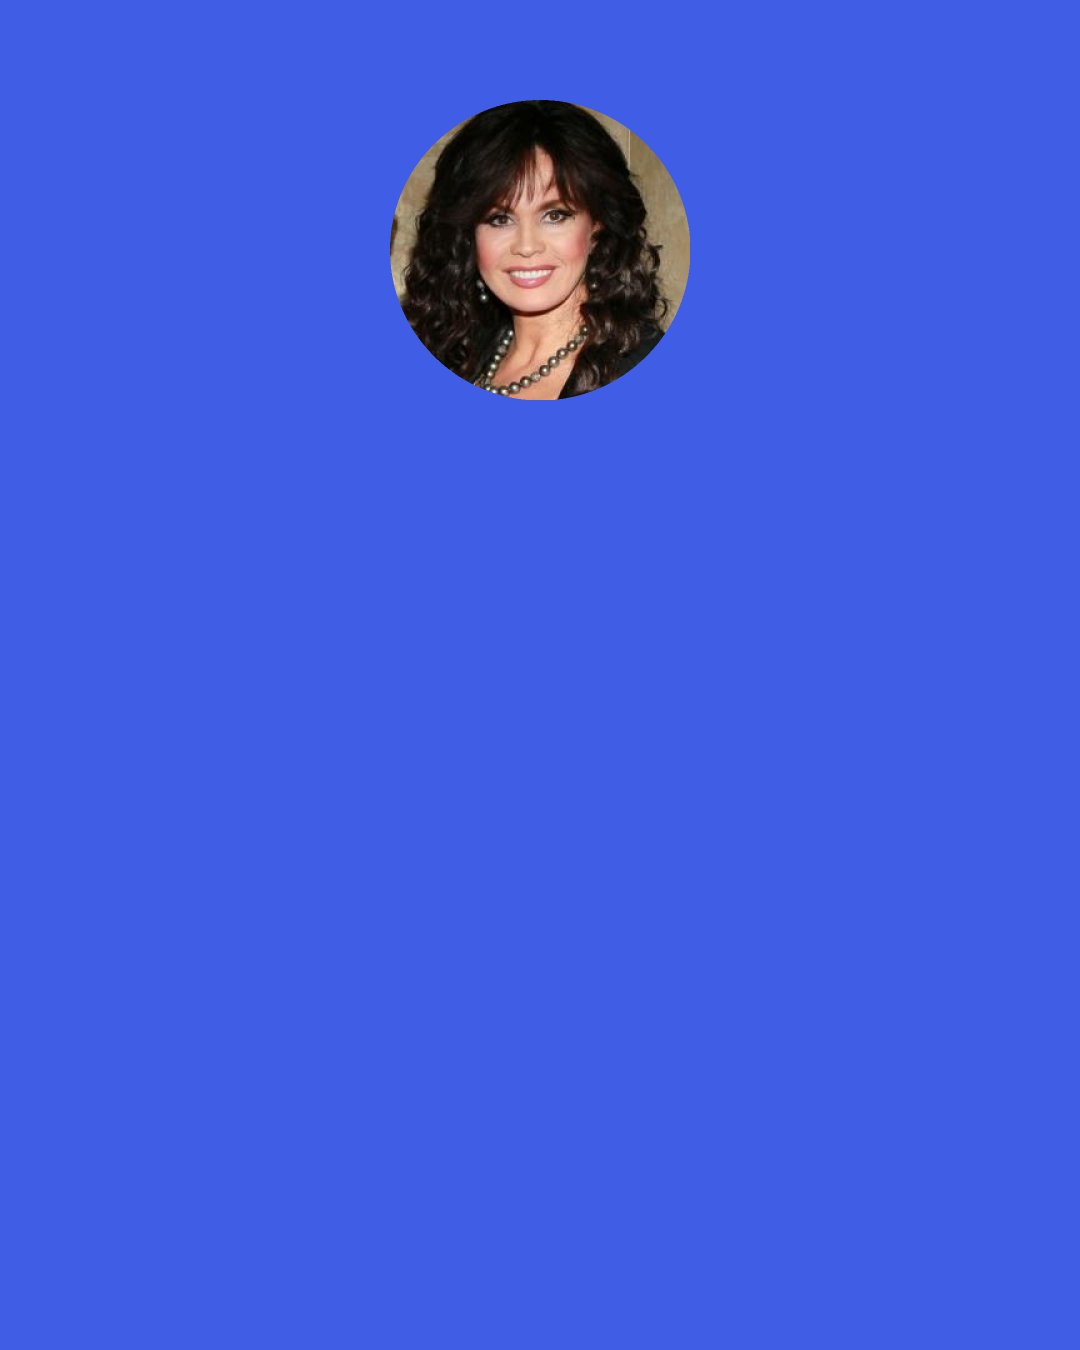 Marie Osmond: I was so honored when Diane Sawyer named me "Person of the Week," and like I told her, "Diane, I love my daughter." I cried when I found out when she told me she was gay when she was 17 because of the judgment.